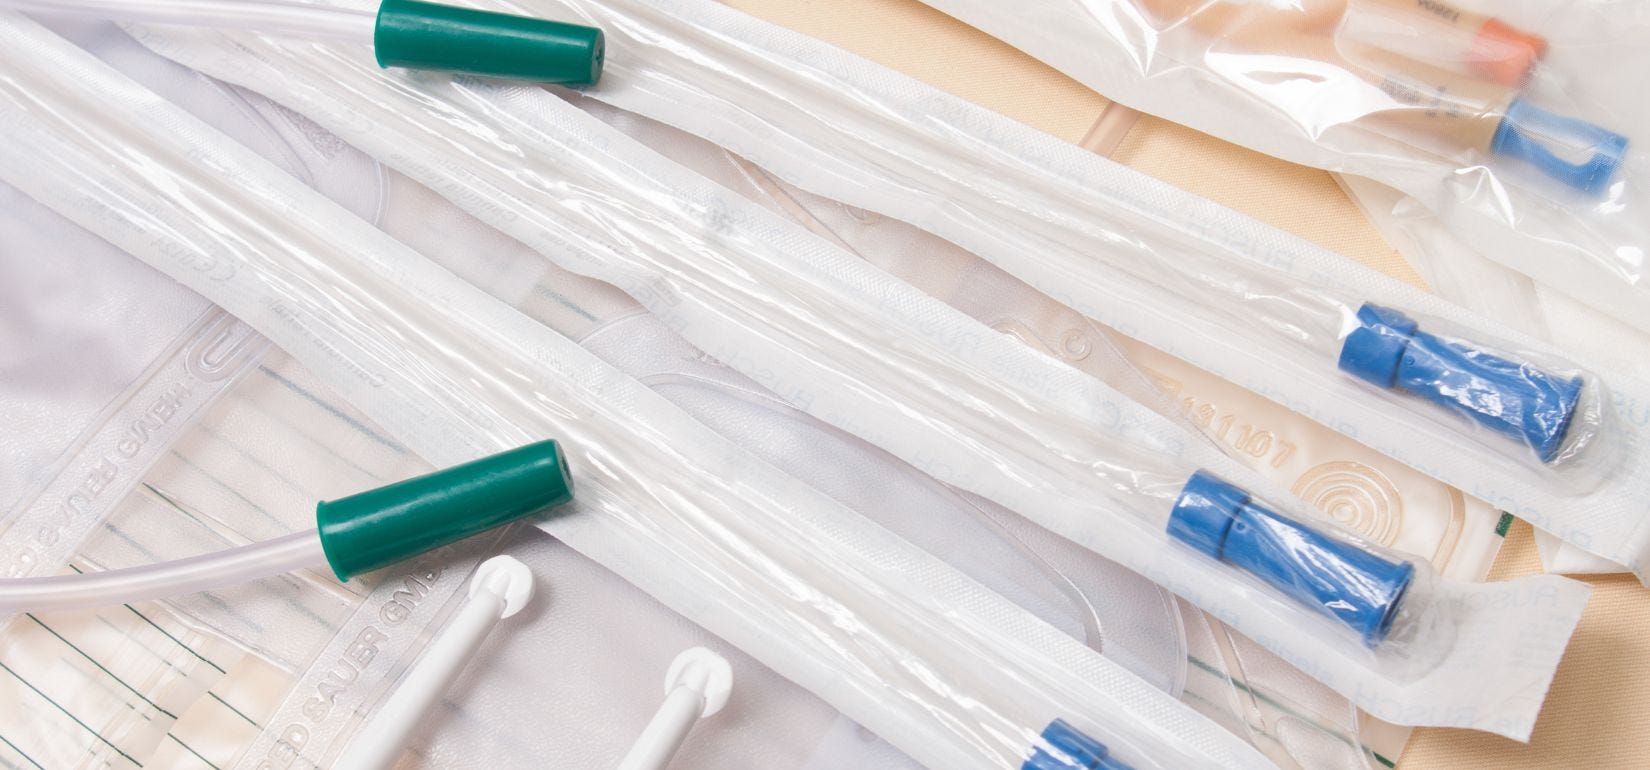 catheters in packages